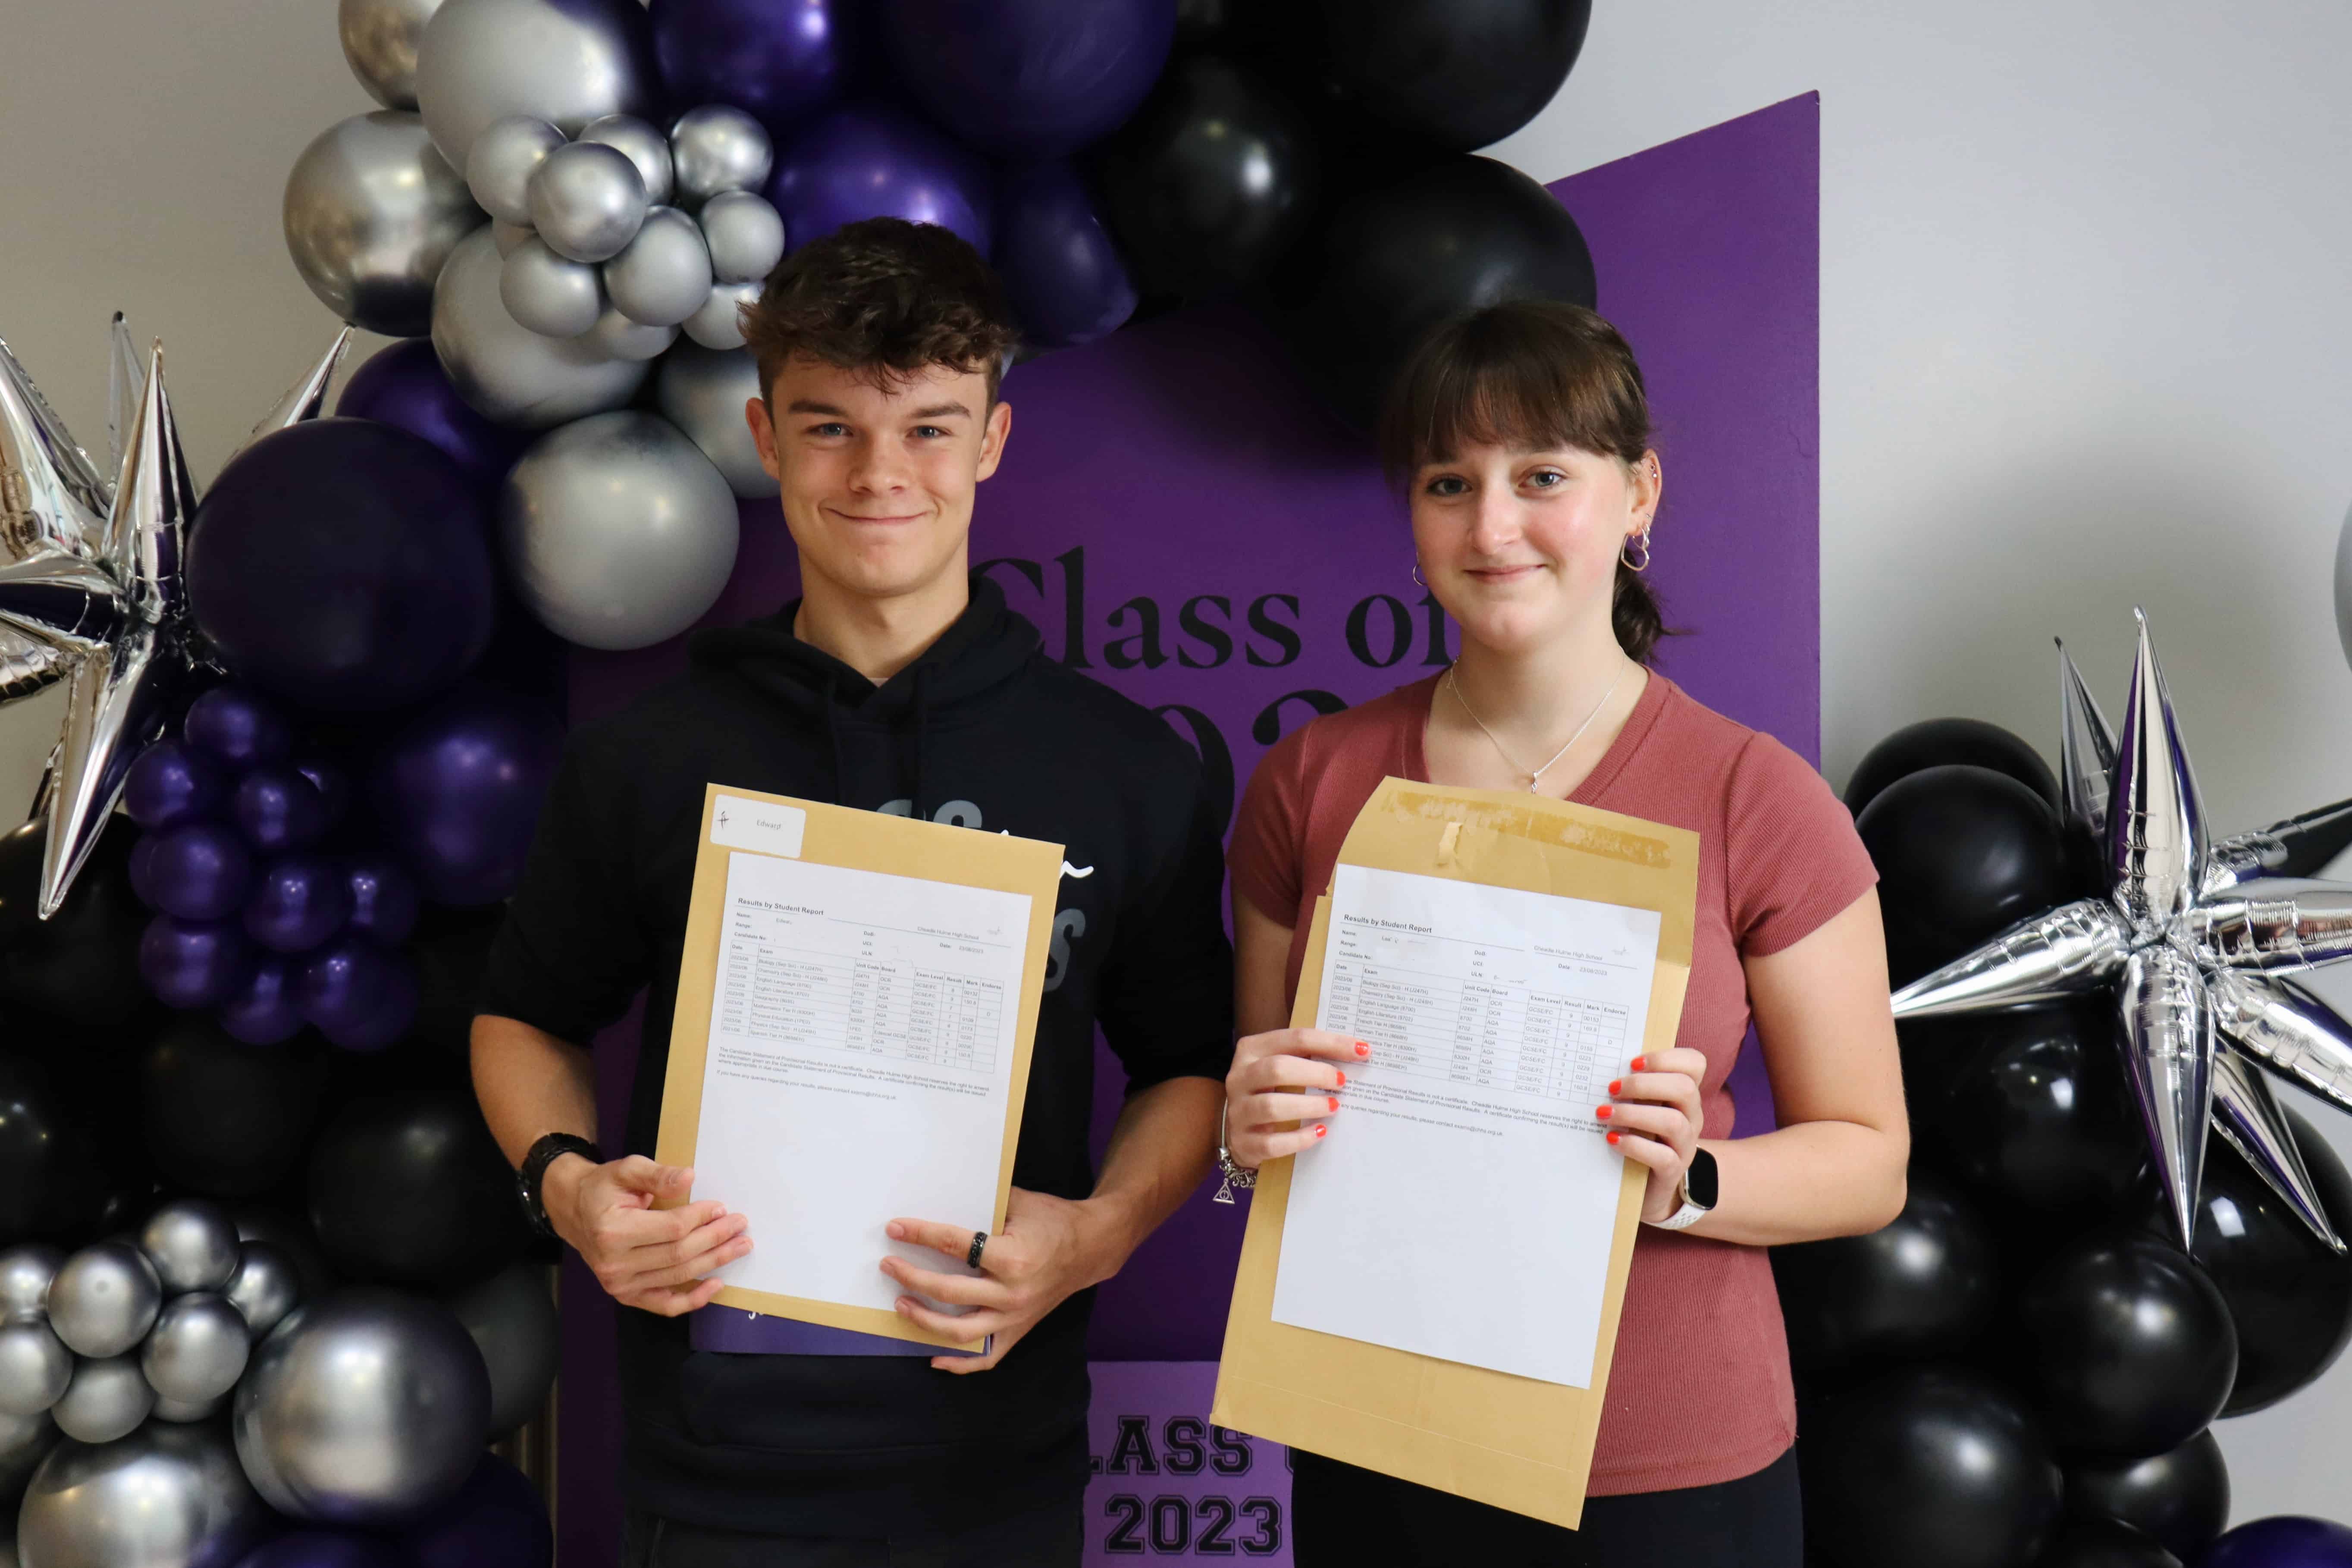 Year 11 prefects from Cheadle Hulme High School celebrated fantastic GCSE results.